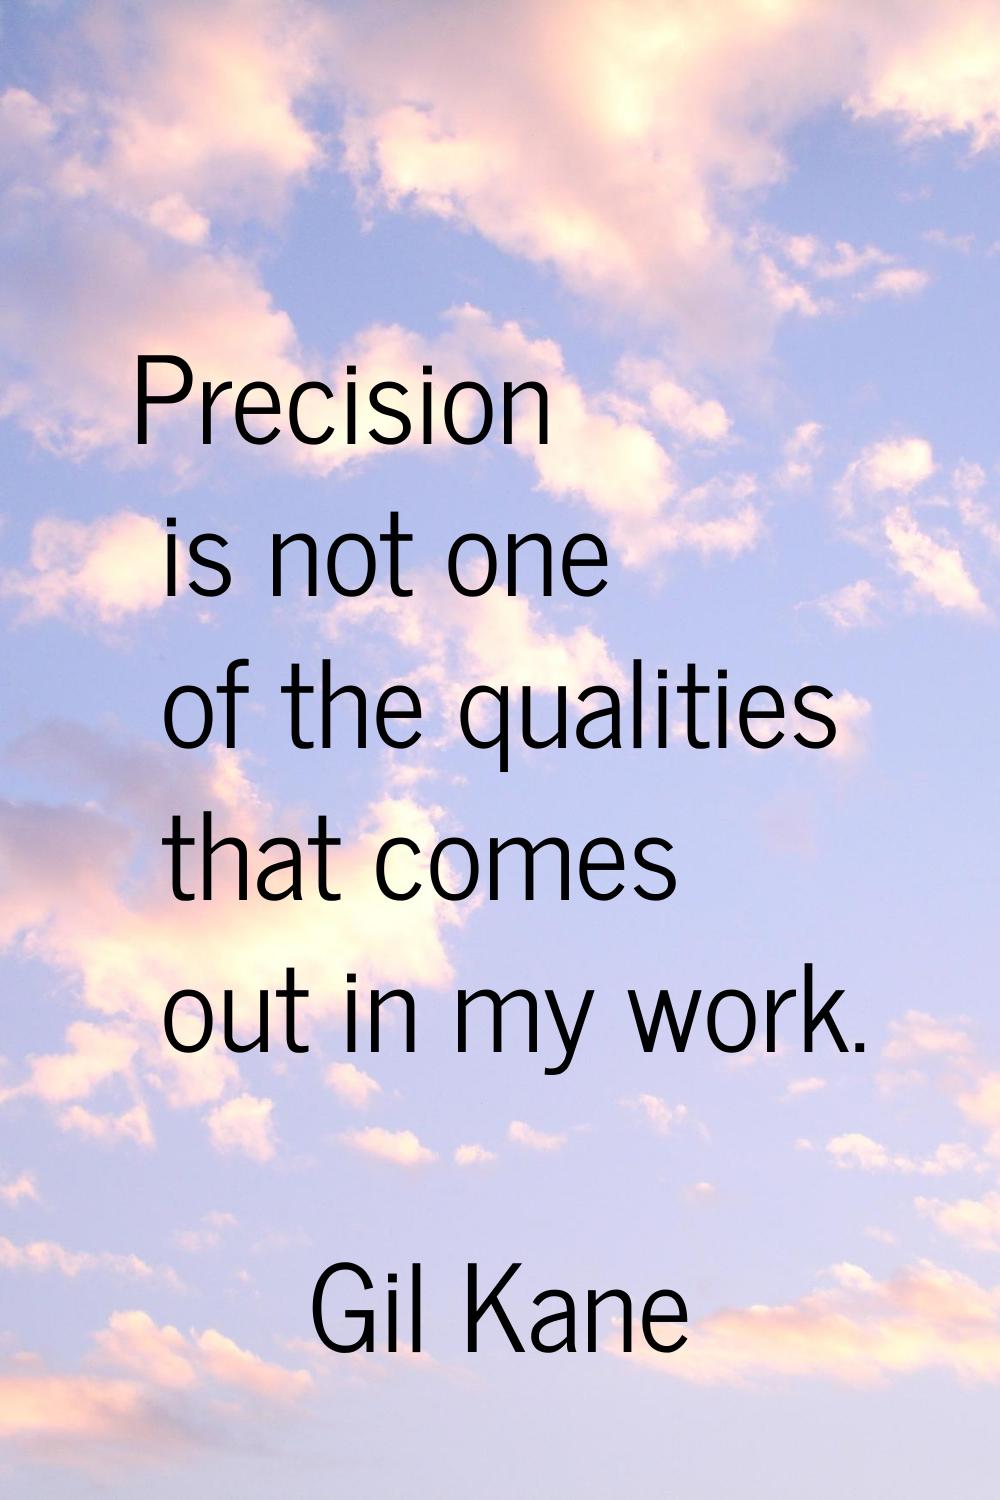 Precision is not one of the qualities that comes out in my work.